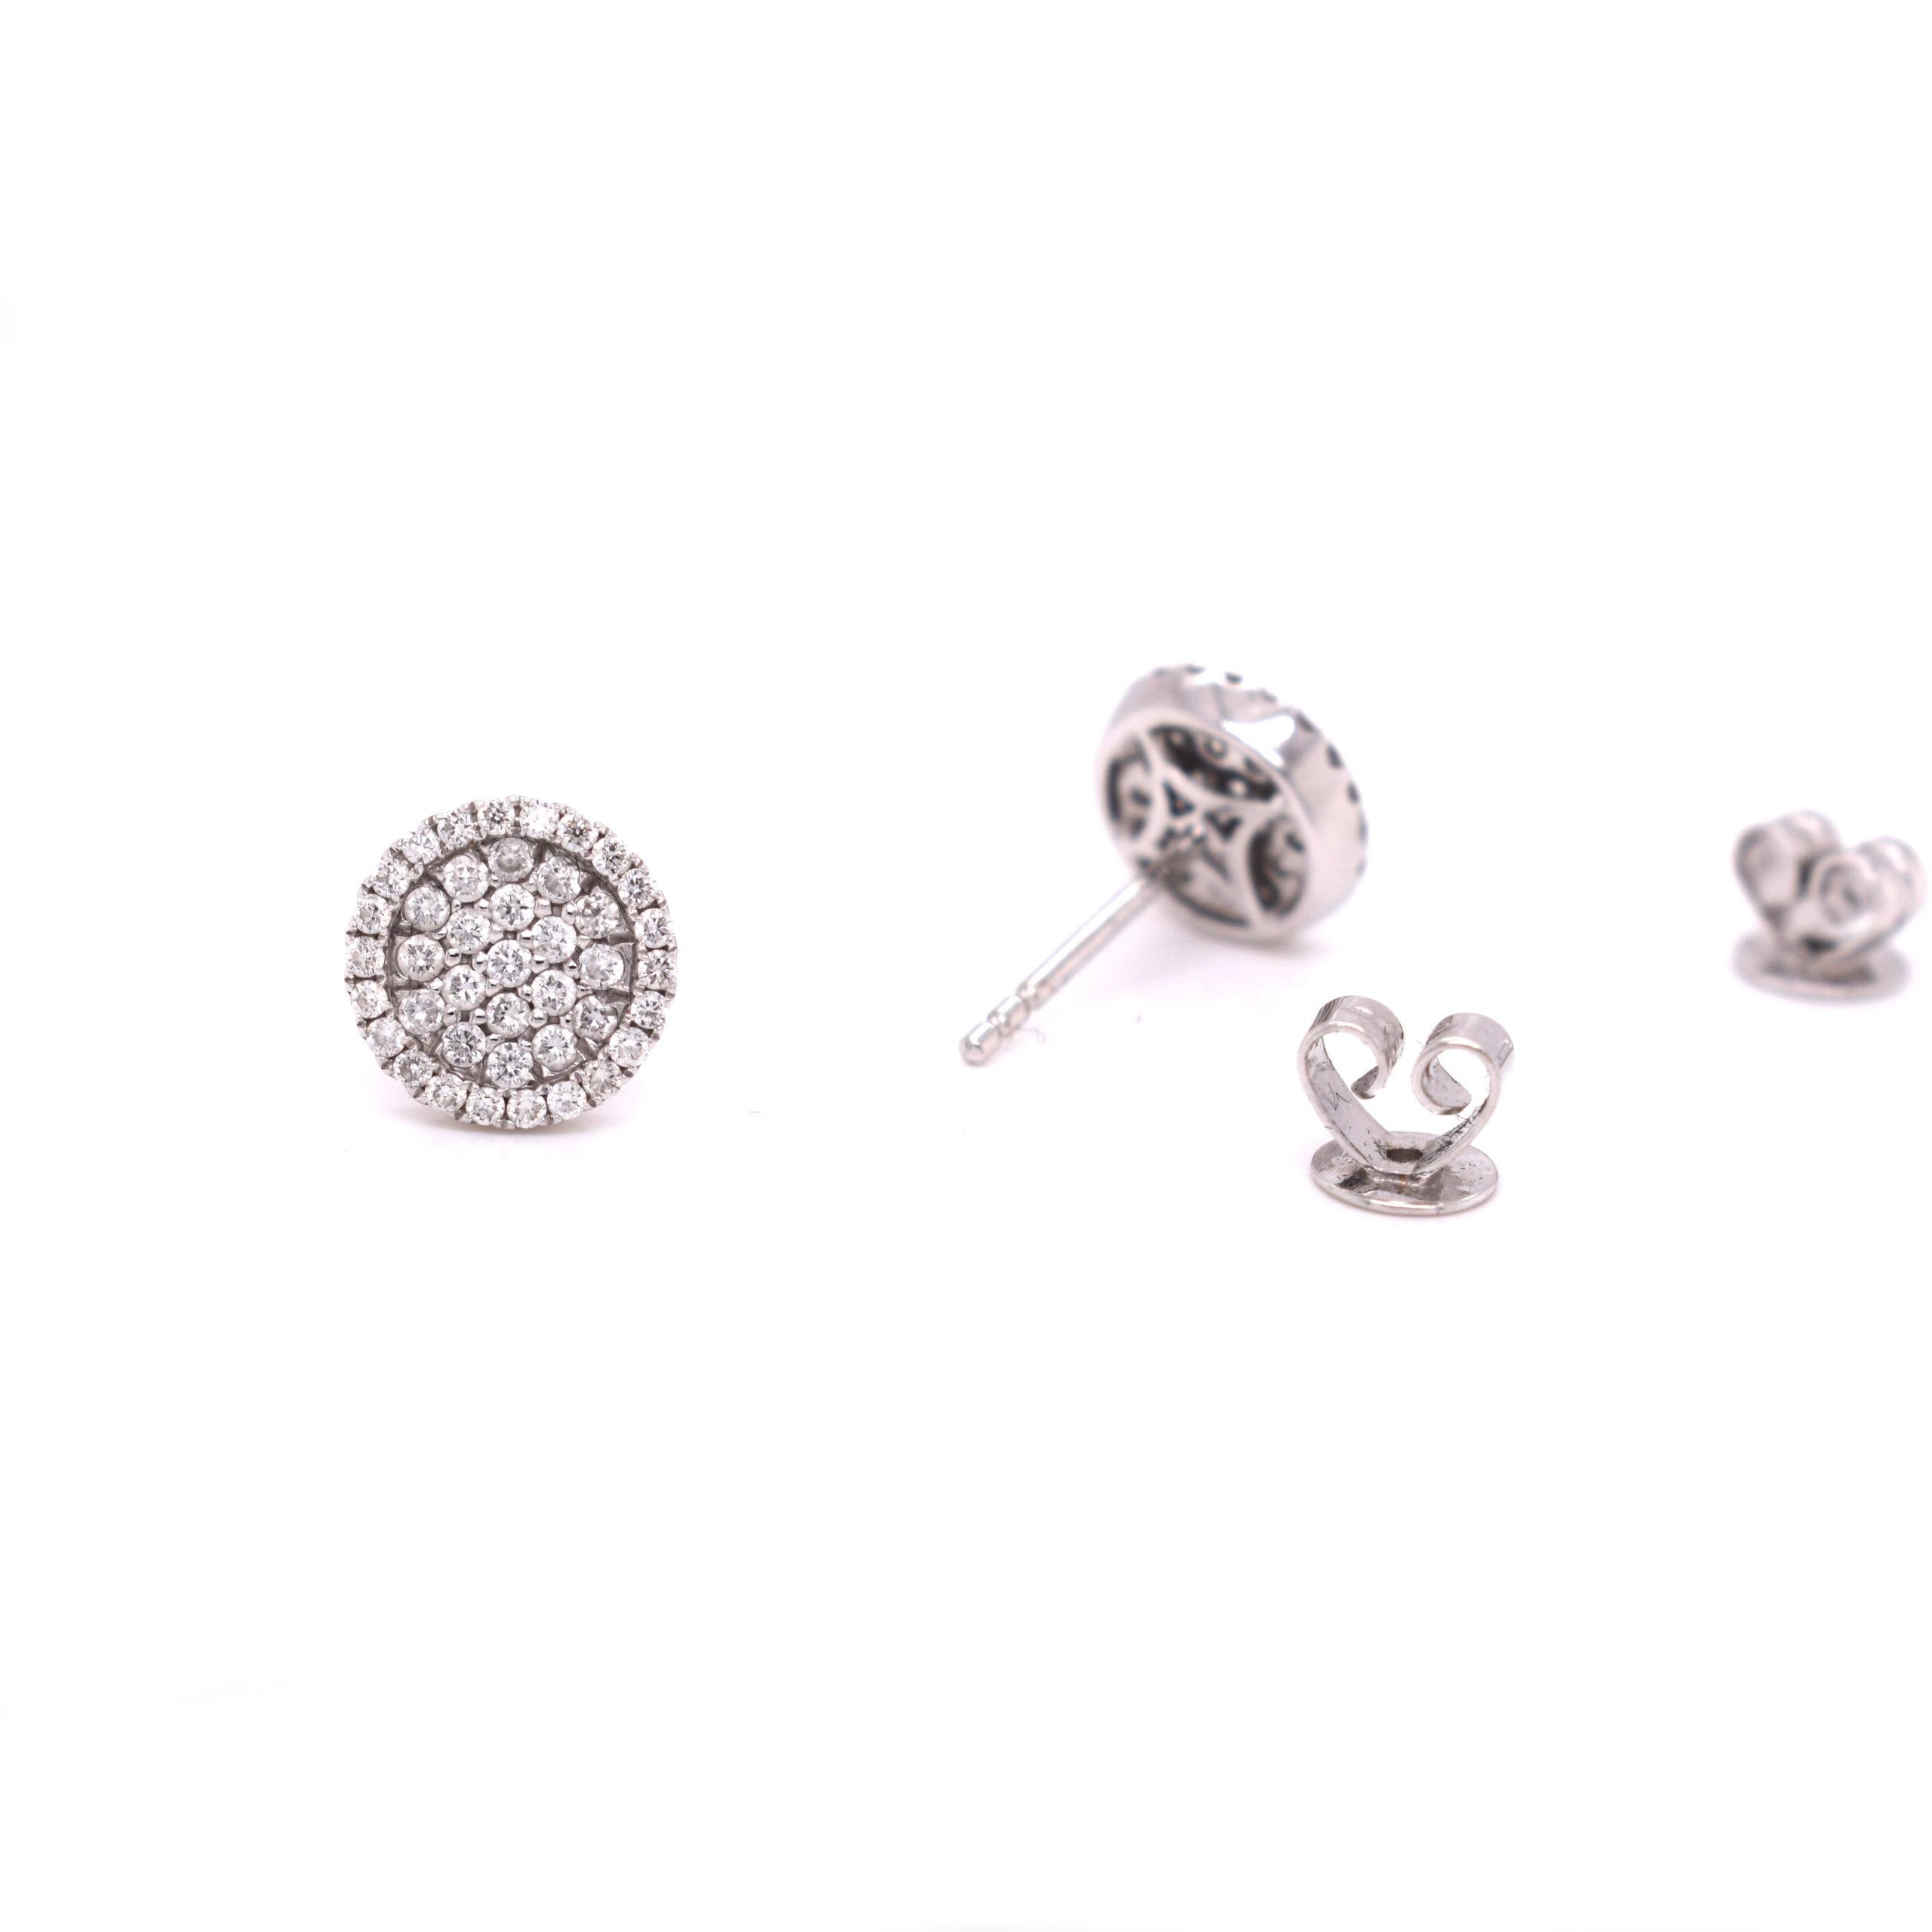 Diamond-Paved in White Gold Optical Illusion Diamond Halo Stud Earrings In Good Condition For Sale In Miami, FL